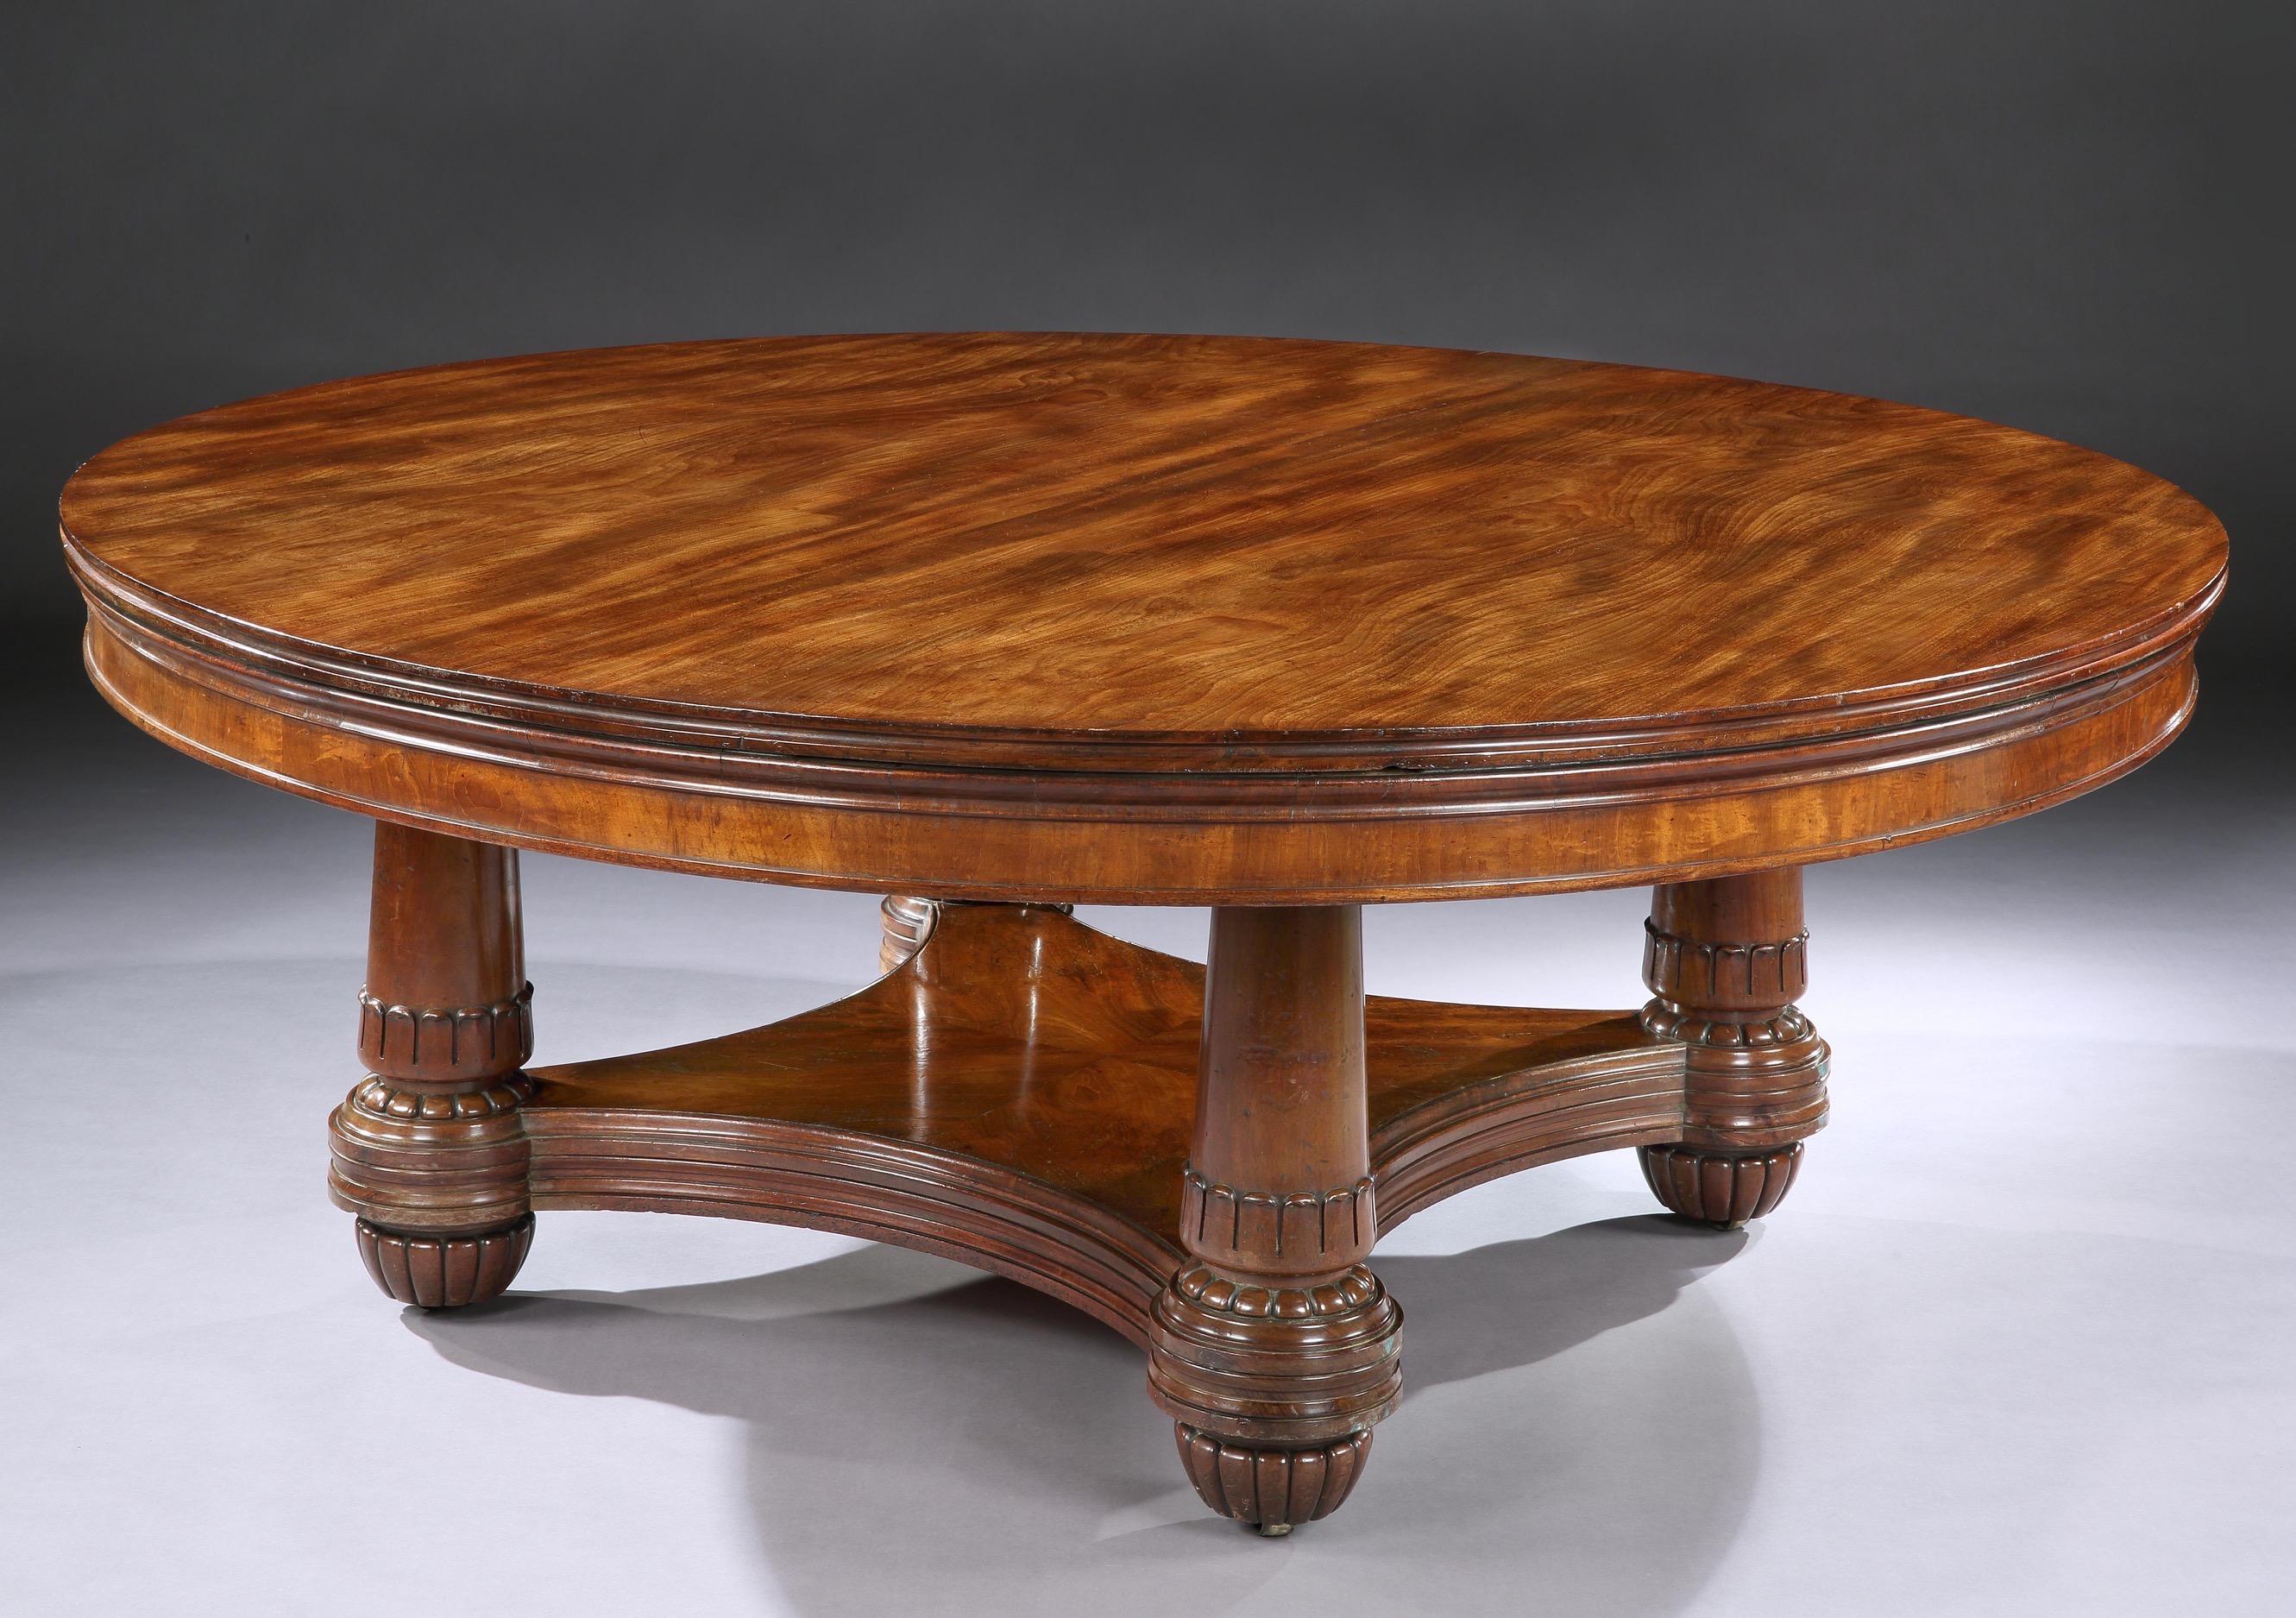 A superbly figured mahogany round extending table, the top with a double moulded edges, with six extending leaves, resting on four turned acanthus carved pillar supports, sitting on a plate-form base, with a treble moulded edge, resting on four